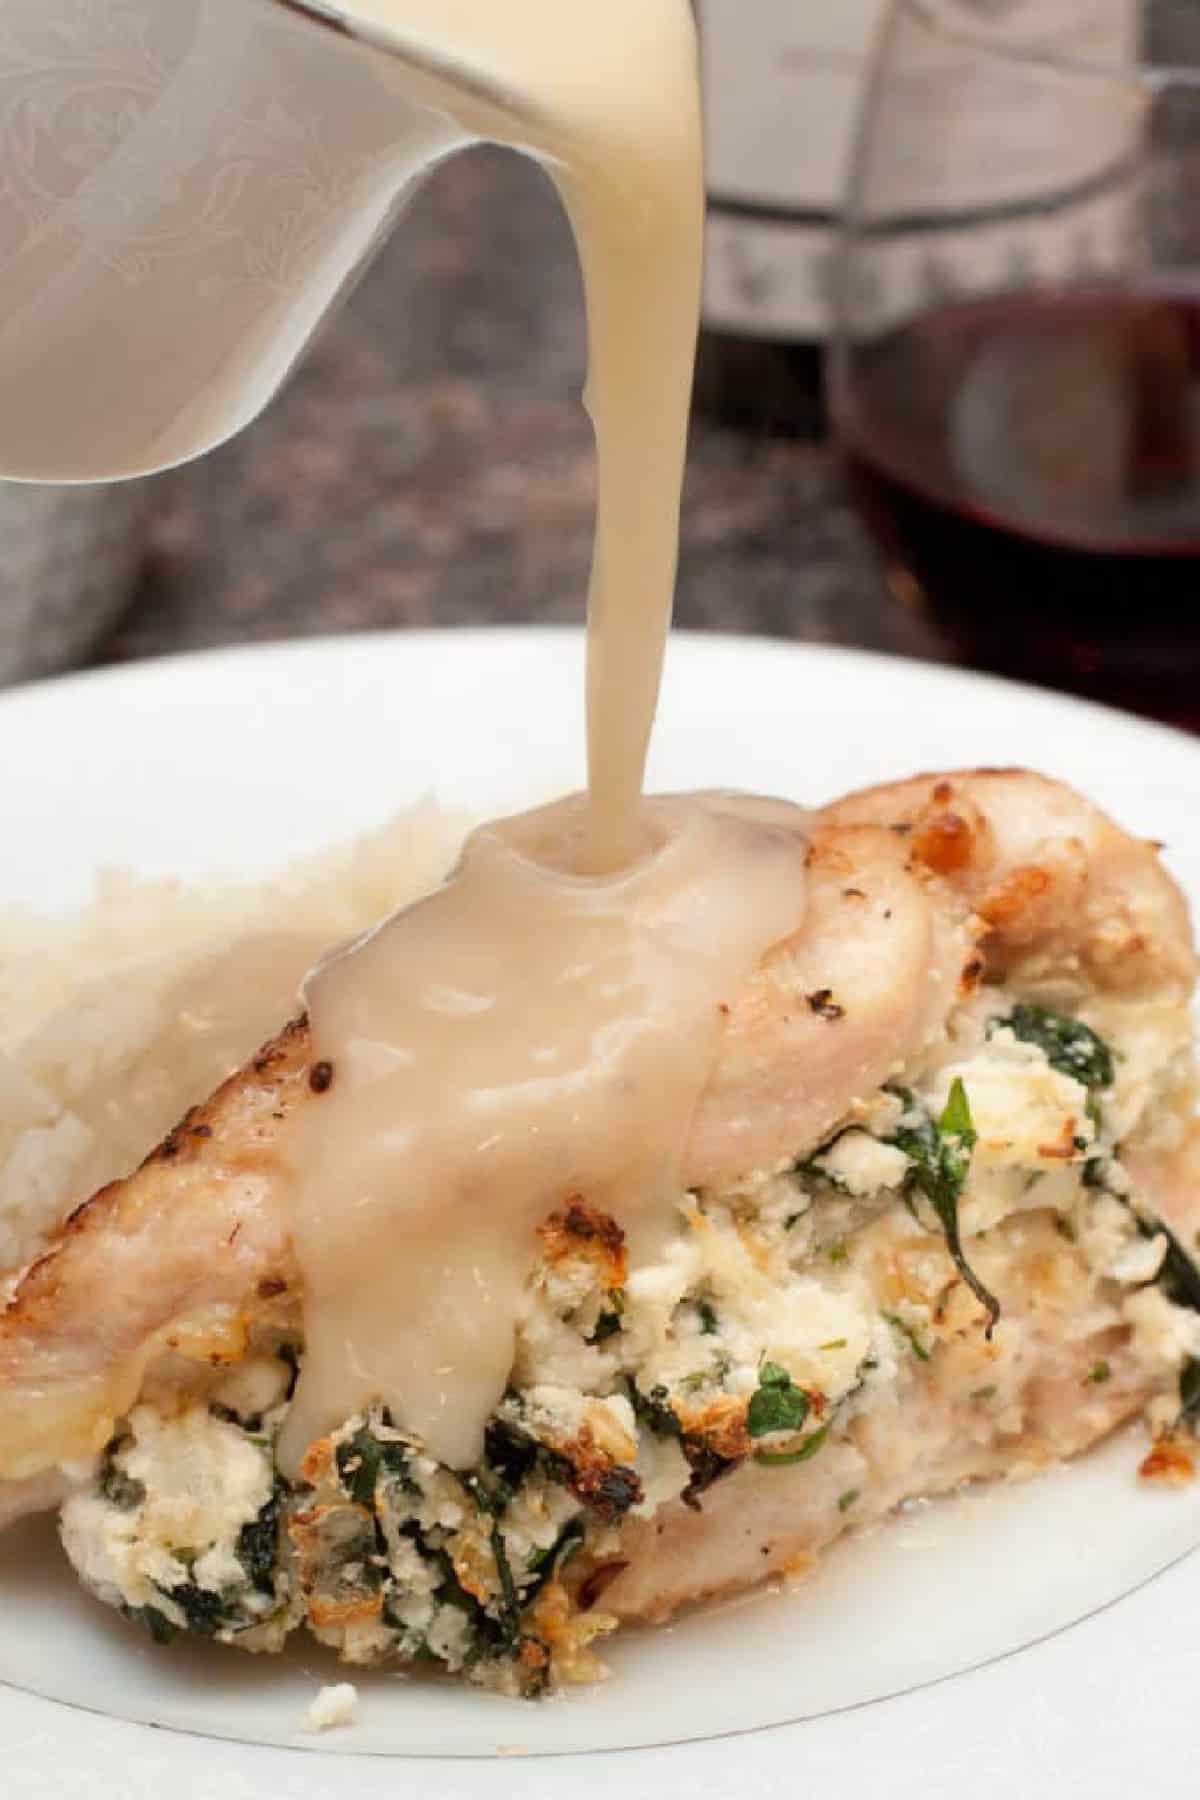 a stuffed chicken breast with gravy being poured on top.